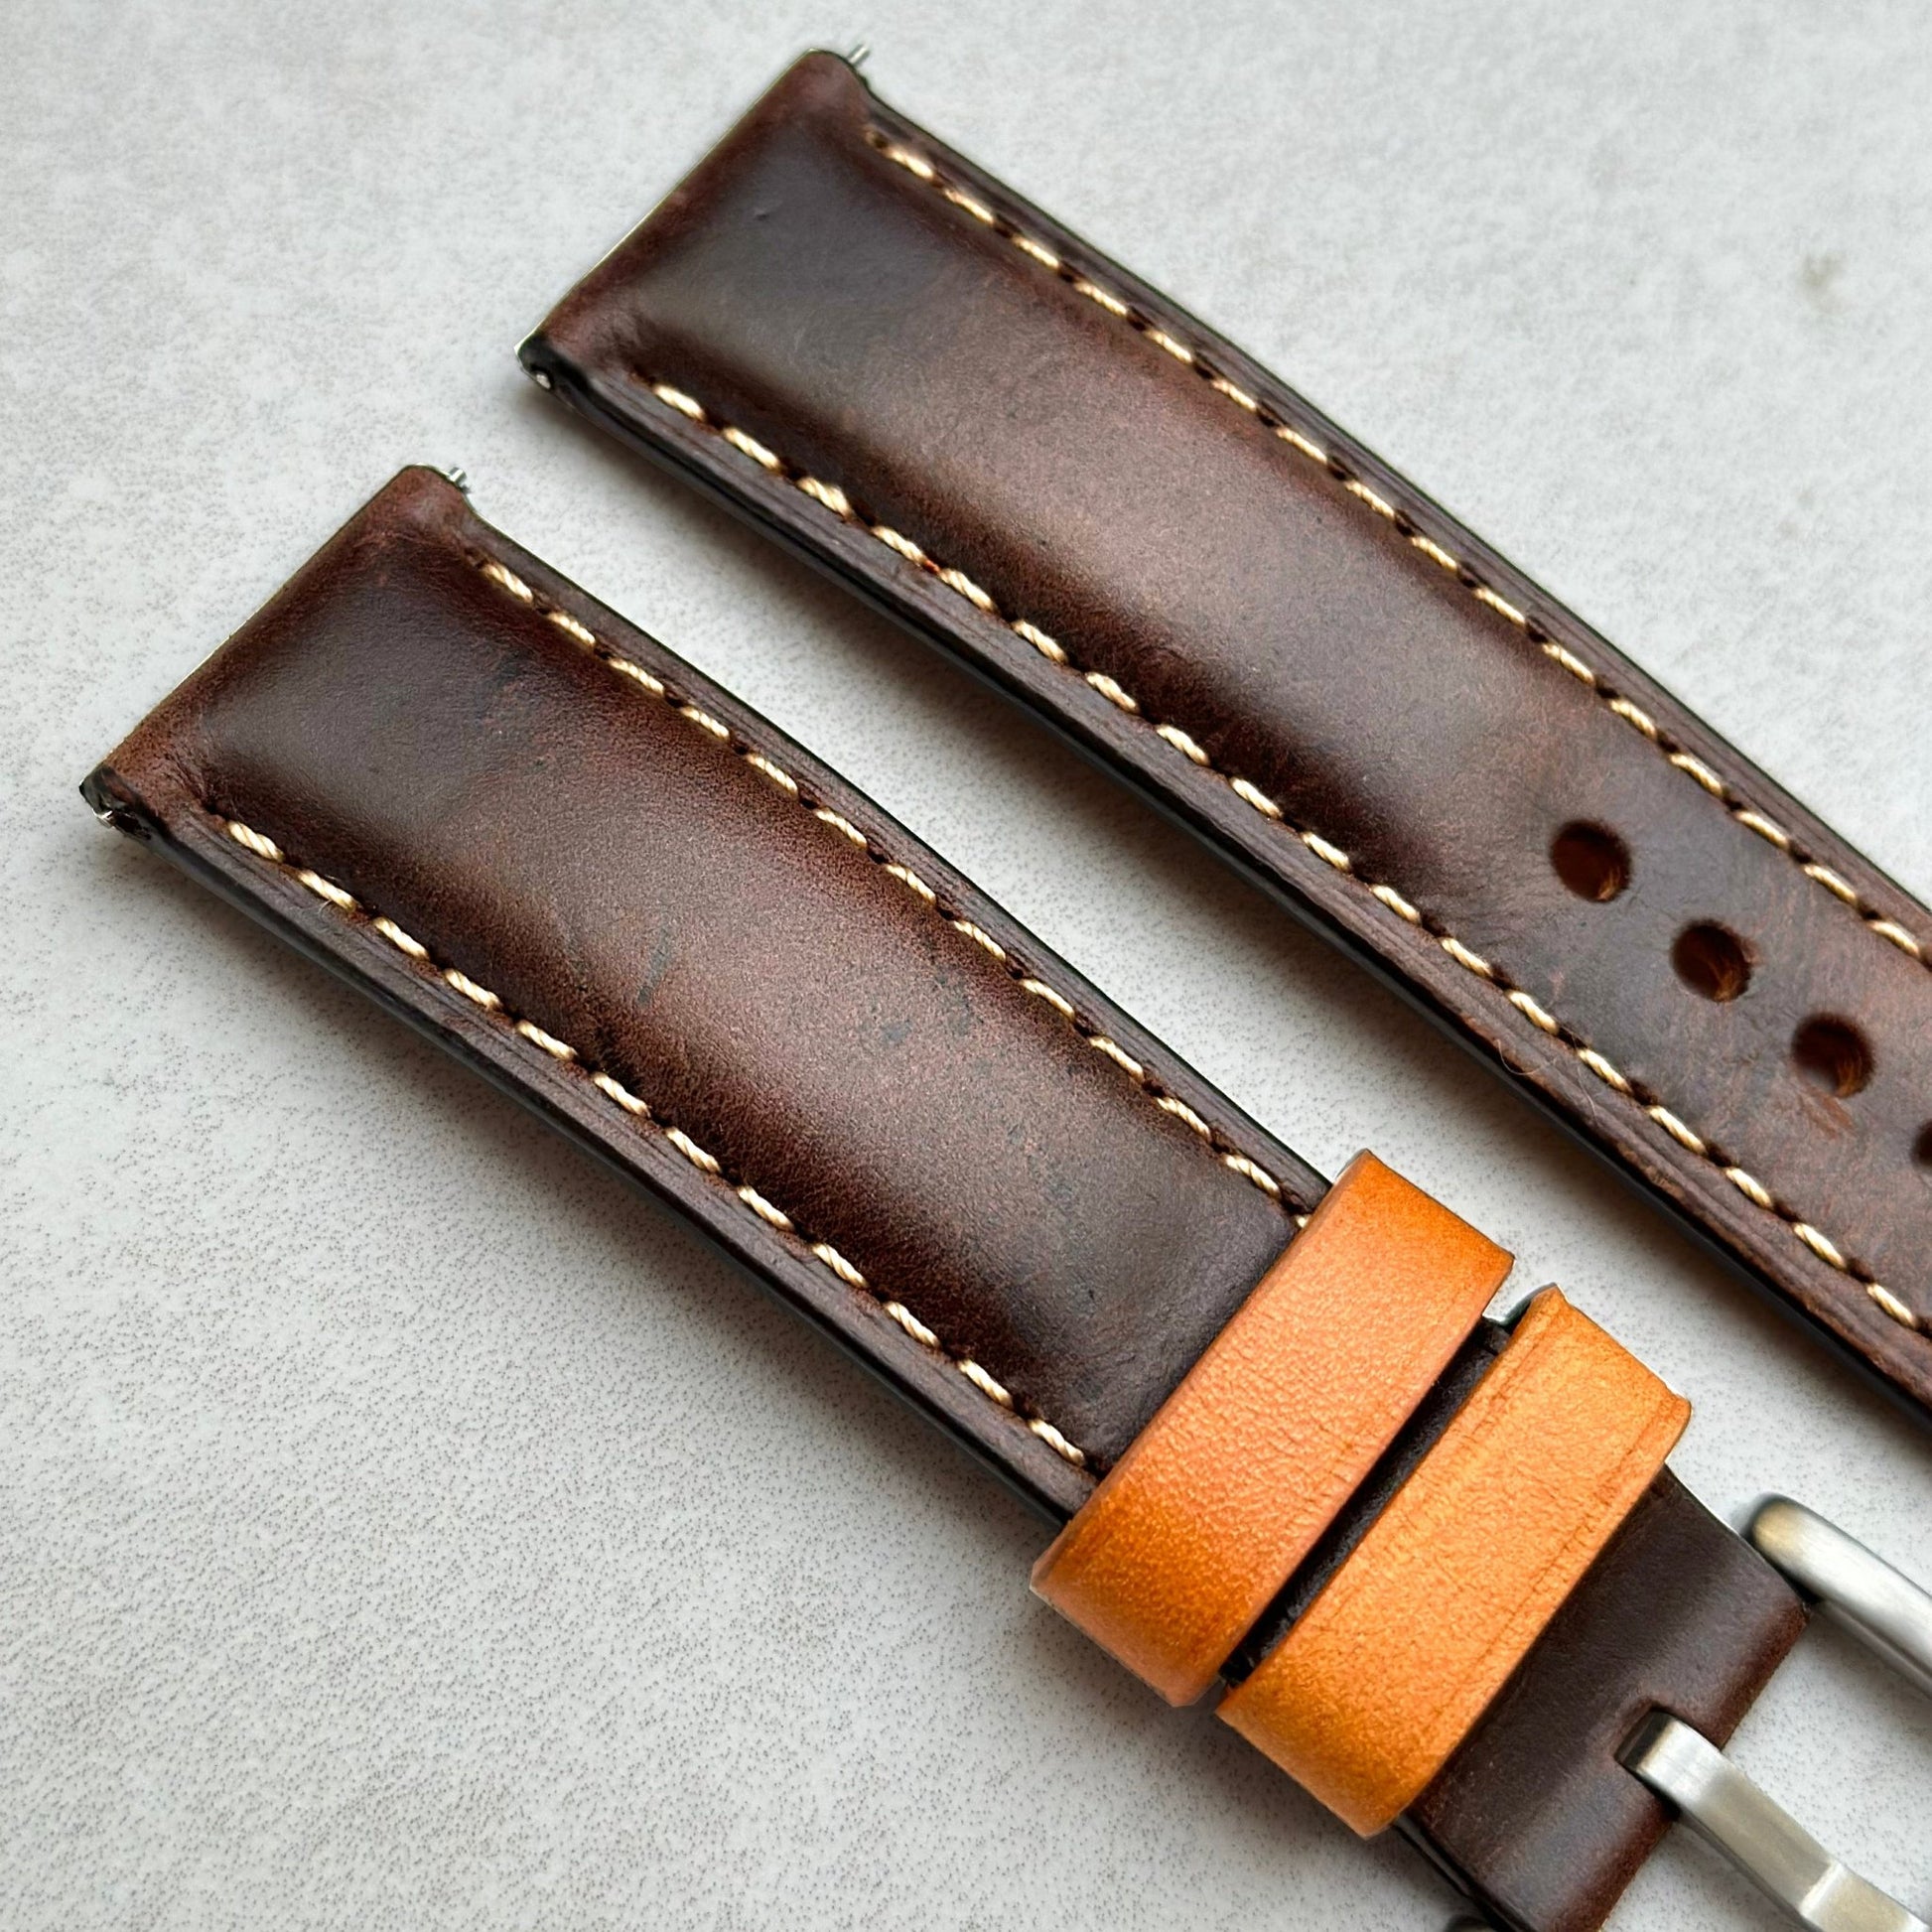 Top of the Oxford chocolate brown leather watch strap. Padded leather watch strap. Contrast ivory stitching. Watch And Strap.